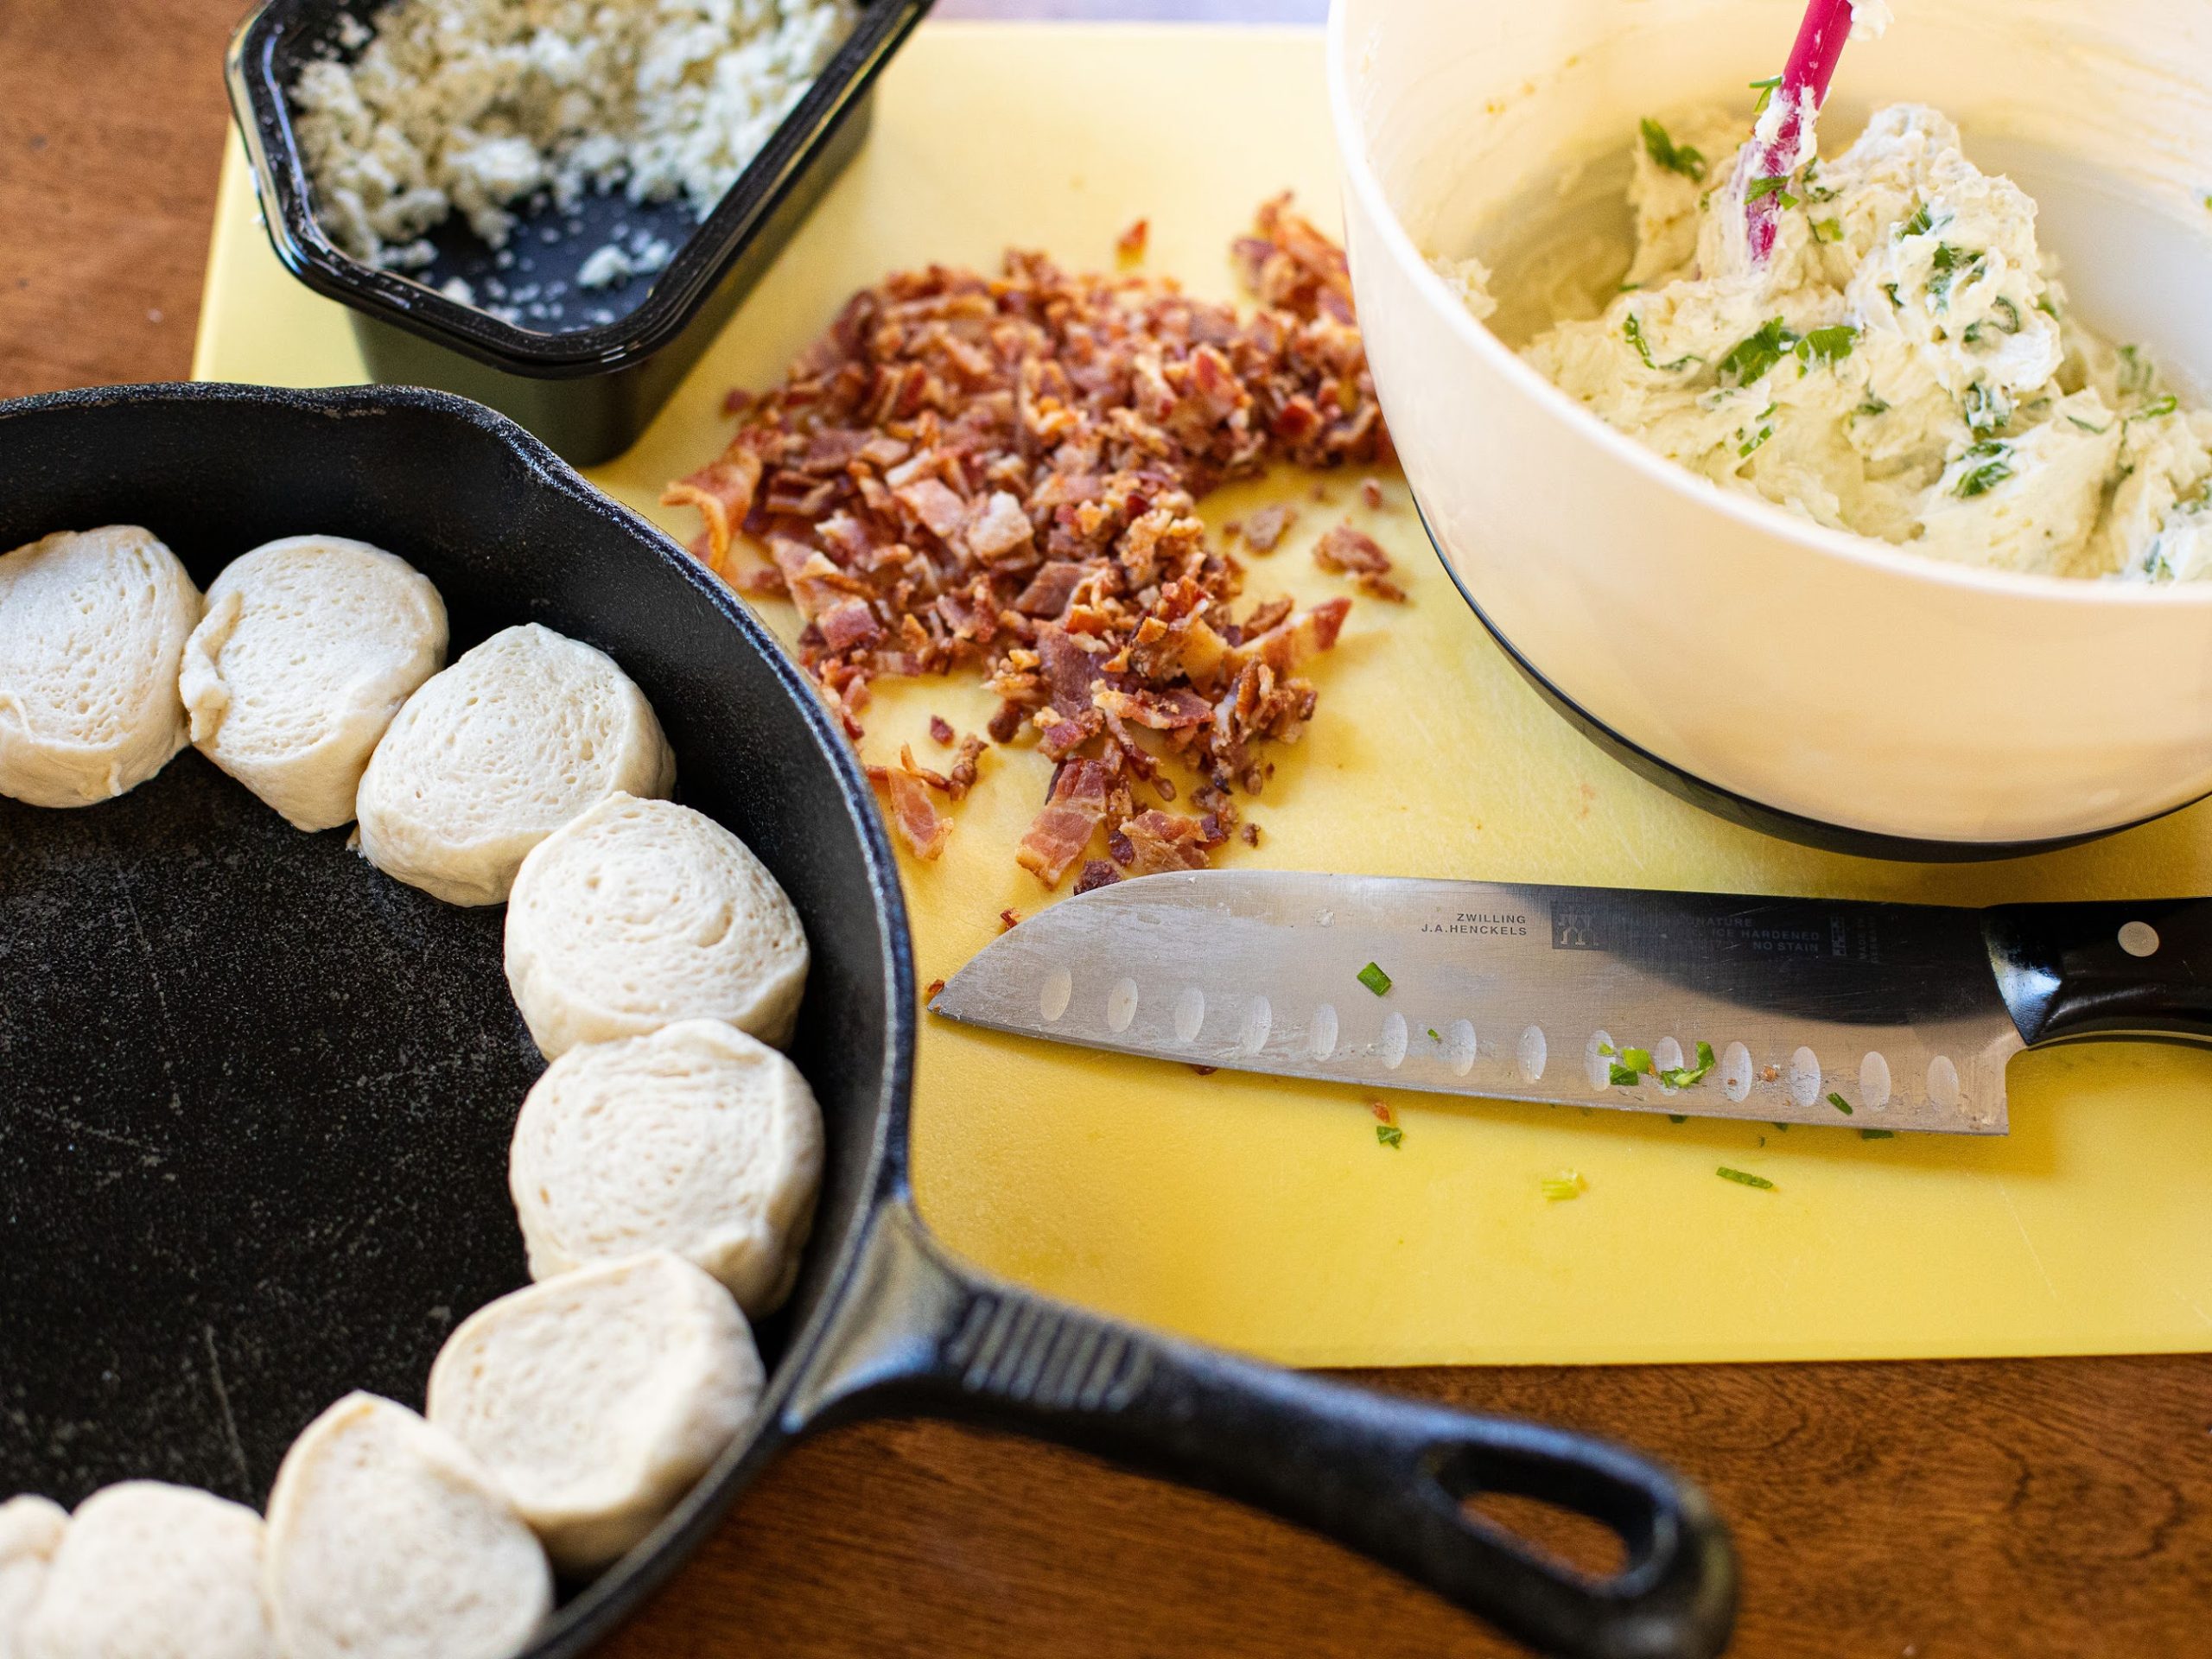 Grab A Deal On Hatfield Bacon & Serve Up Bacon Gorgonzola Skillet Dip At Your Next Holiday Gathering! on I Heart Publix 2